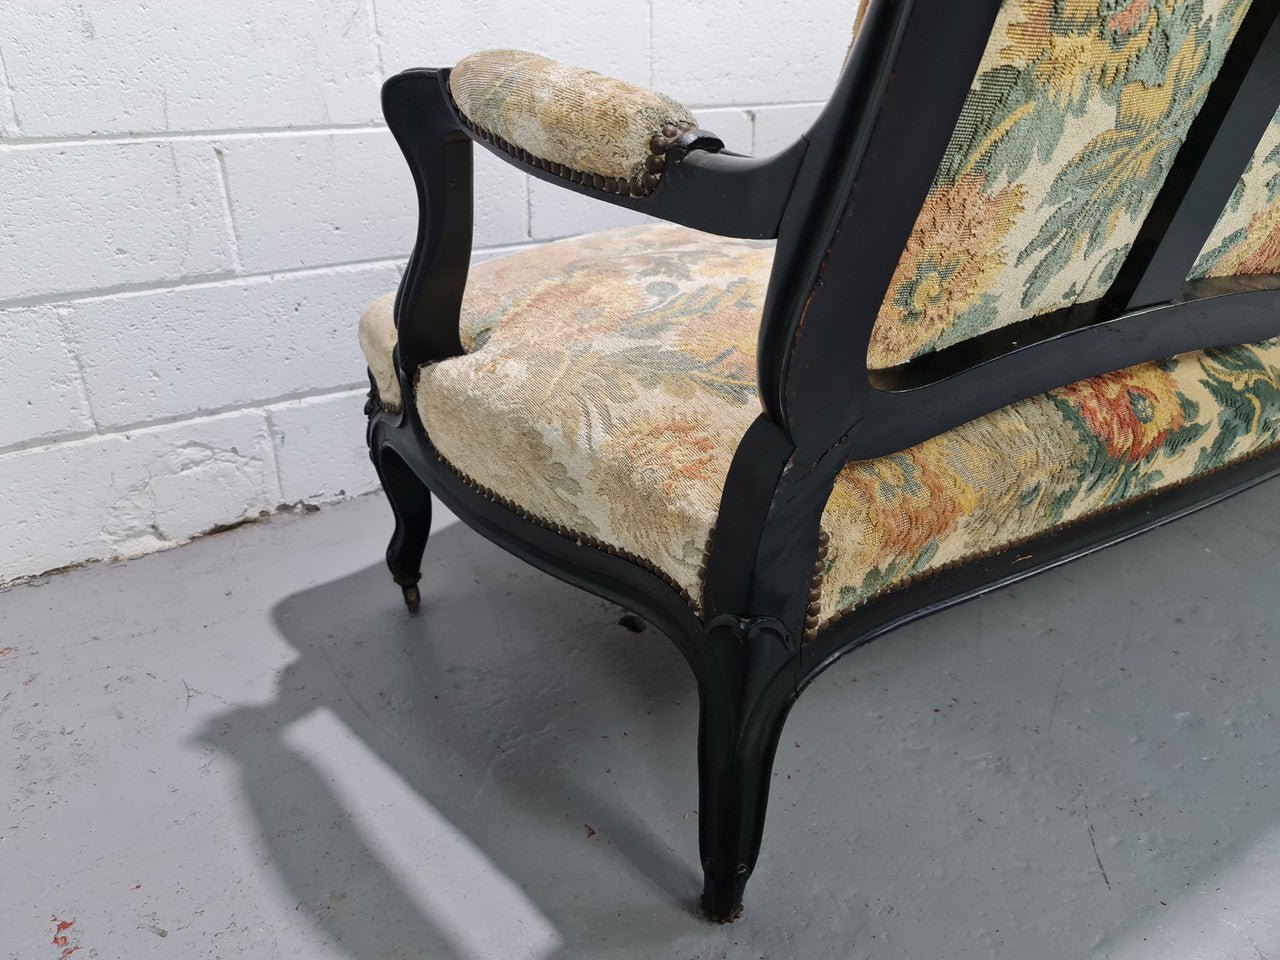 A Substantial Antique 19th Century Louis XV style ebonized serpentine front settee. The fabric is in used condition showing use and could be used as is or reupholster.